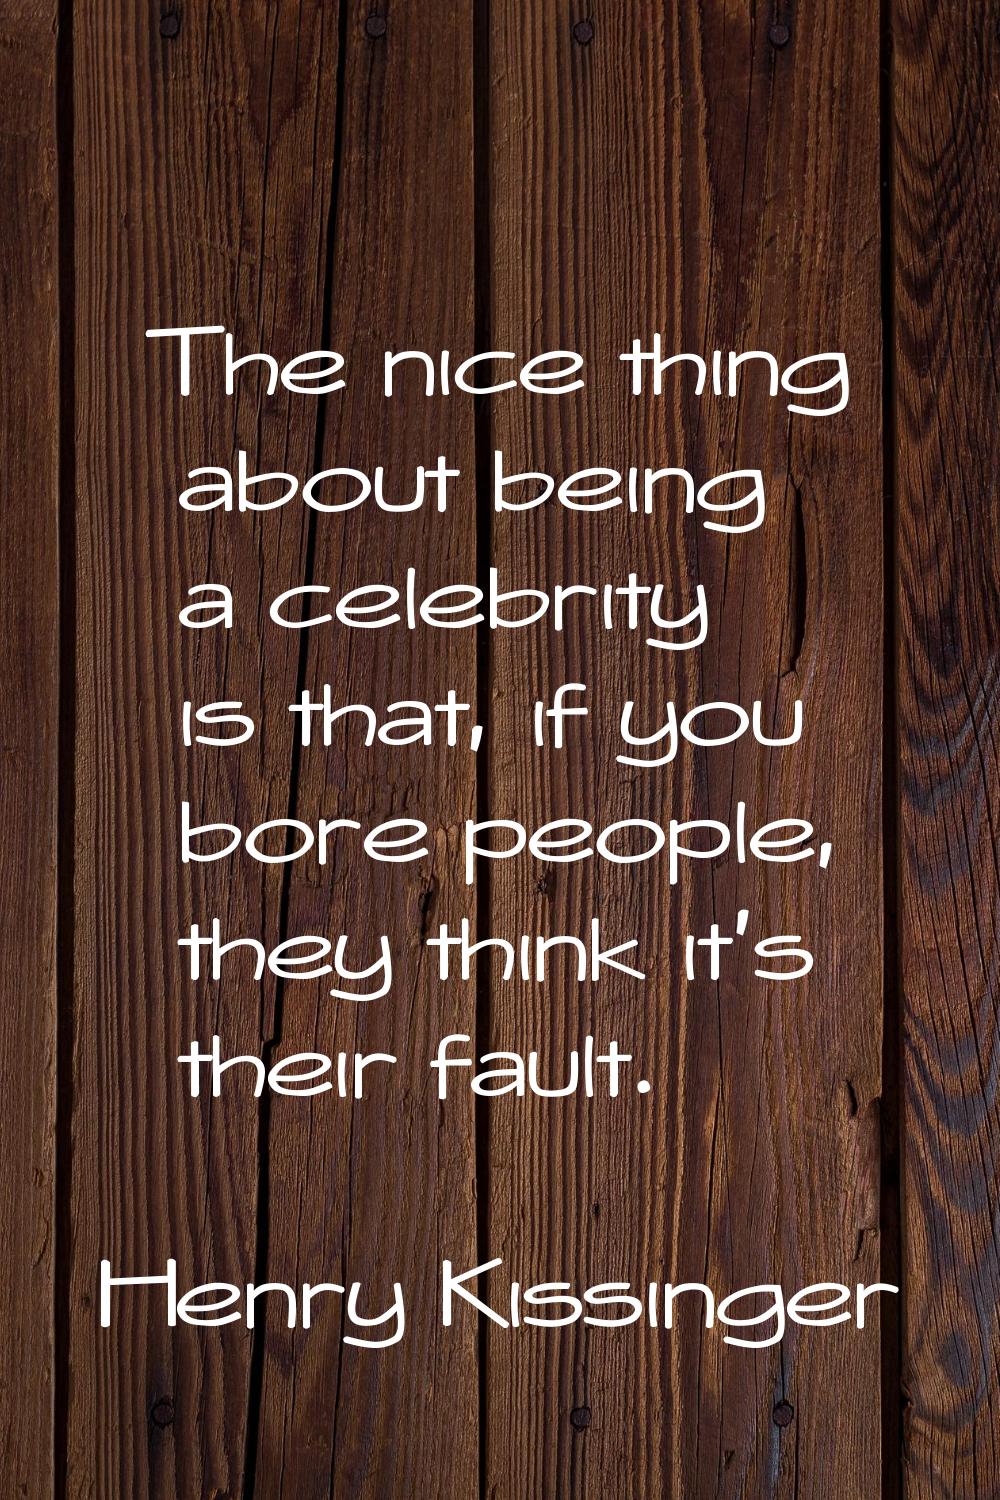 The nice thing about being a celebrity is that, if you bore people, they think it's their fault.